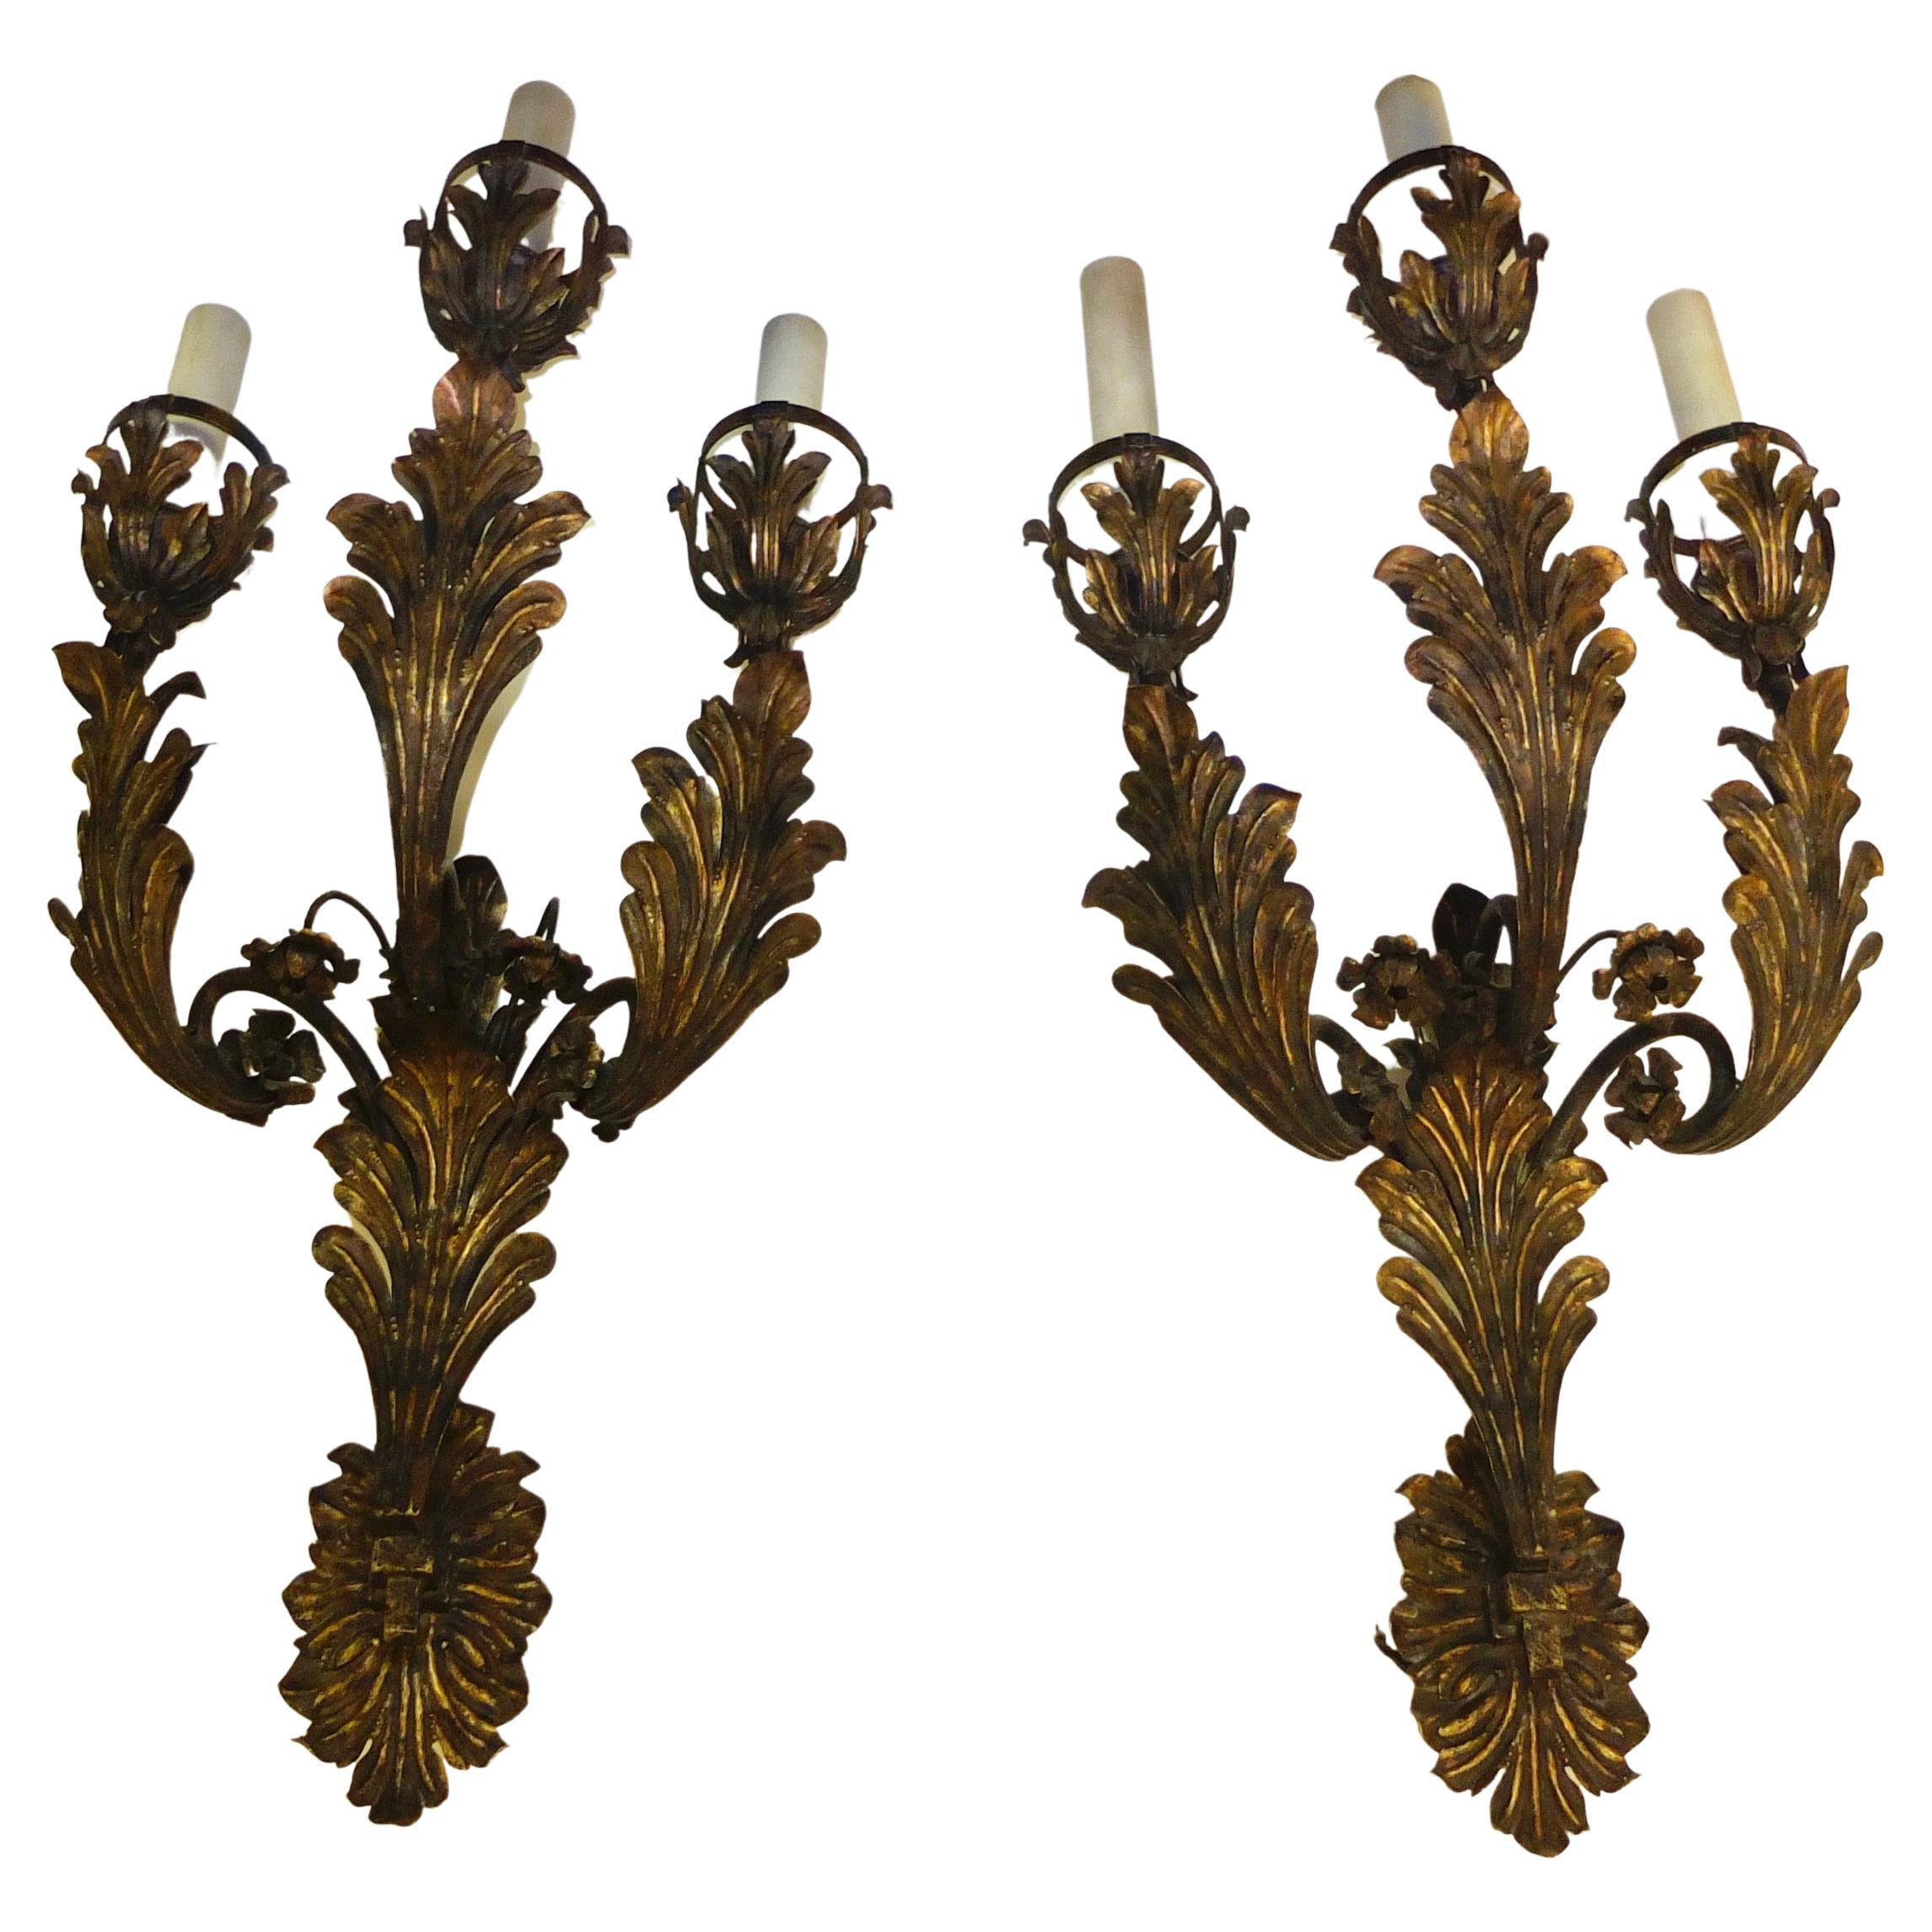 Palazzo Scale Italian Tole Sconces with Acanthus Leaves For Sale